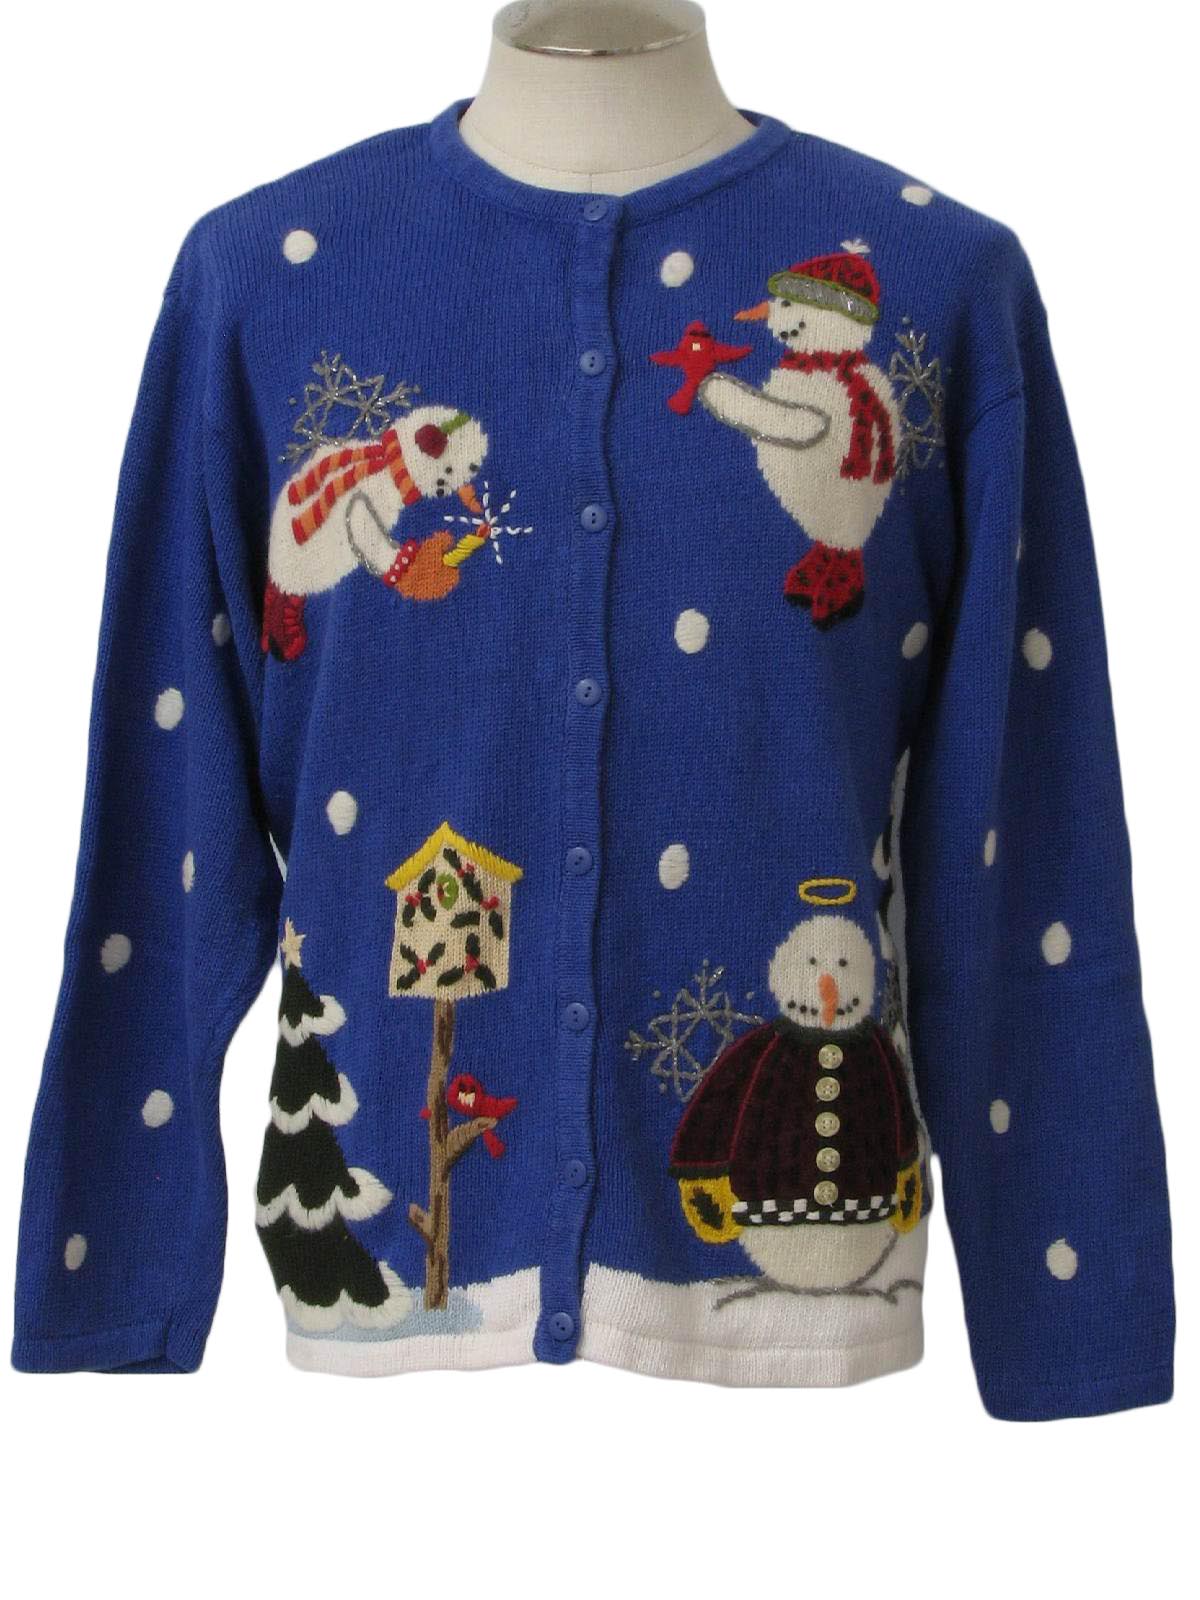 Womens Ugly Christmas Sweater: -Quacker Factory- Womens blue background ...